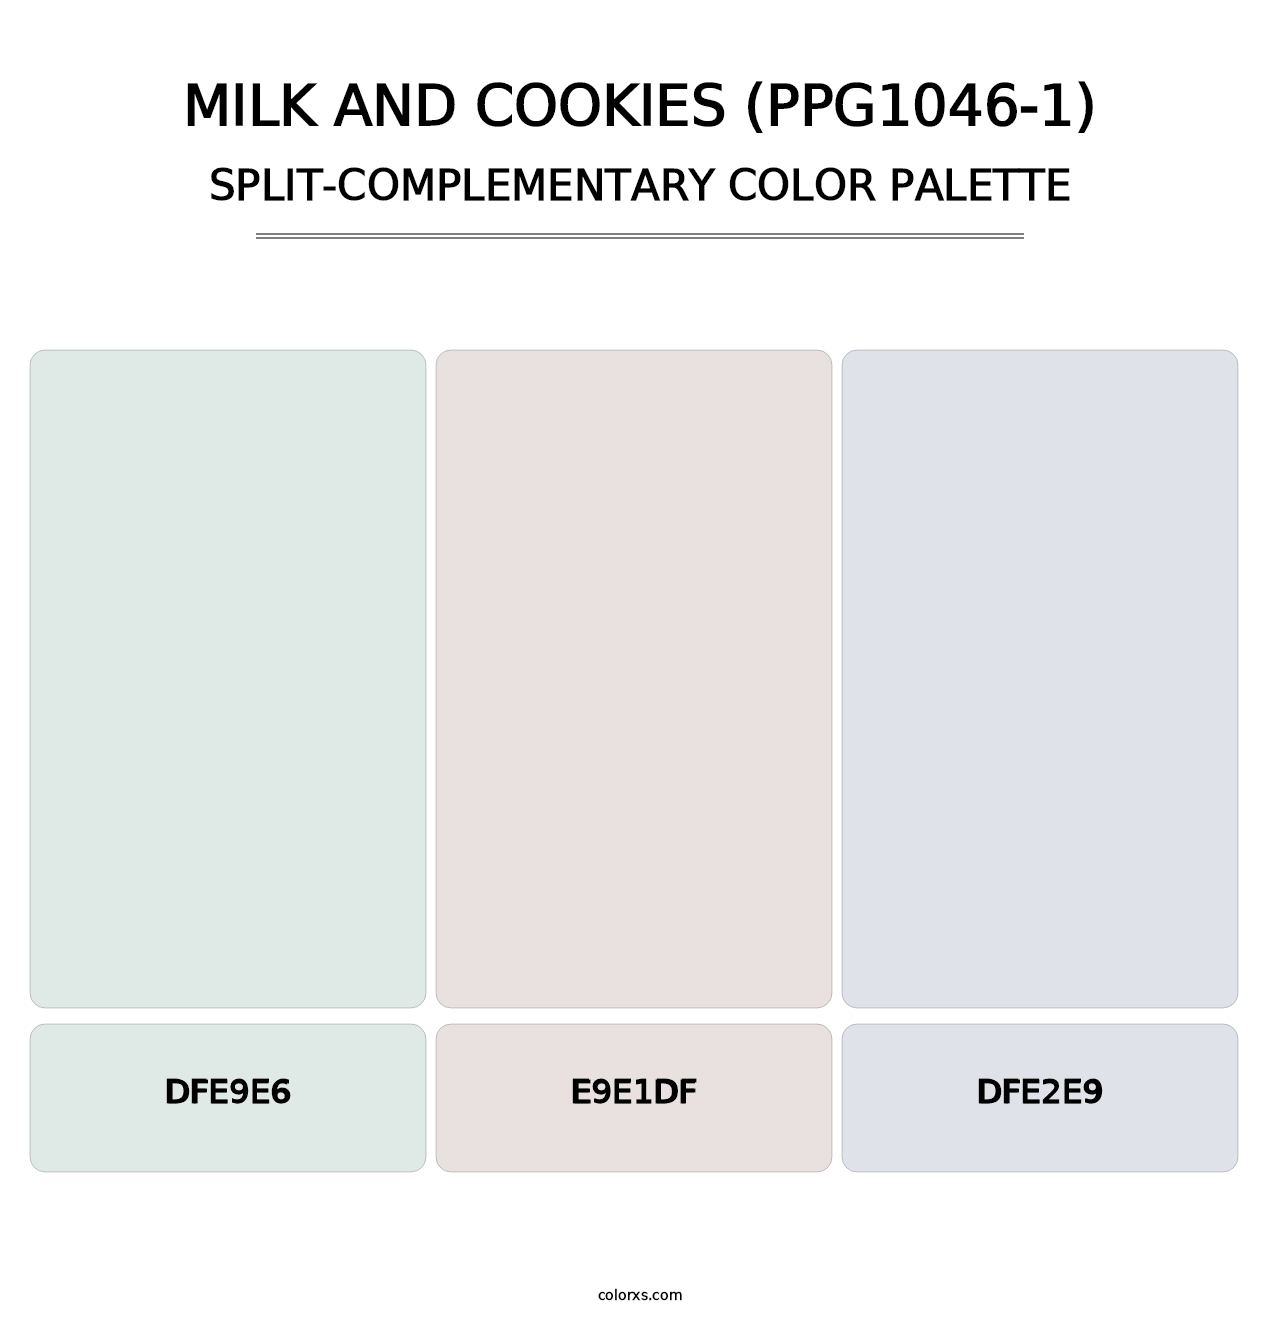 Milk And Cookies (PPG1046-1) - Split-Complementary Color Palette